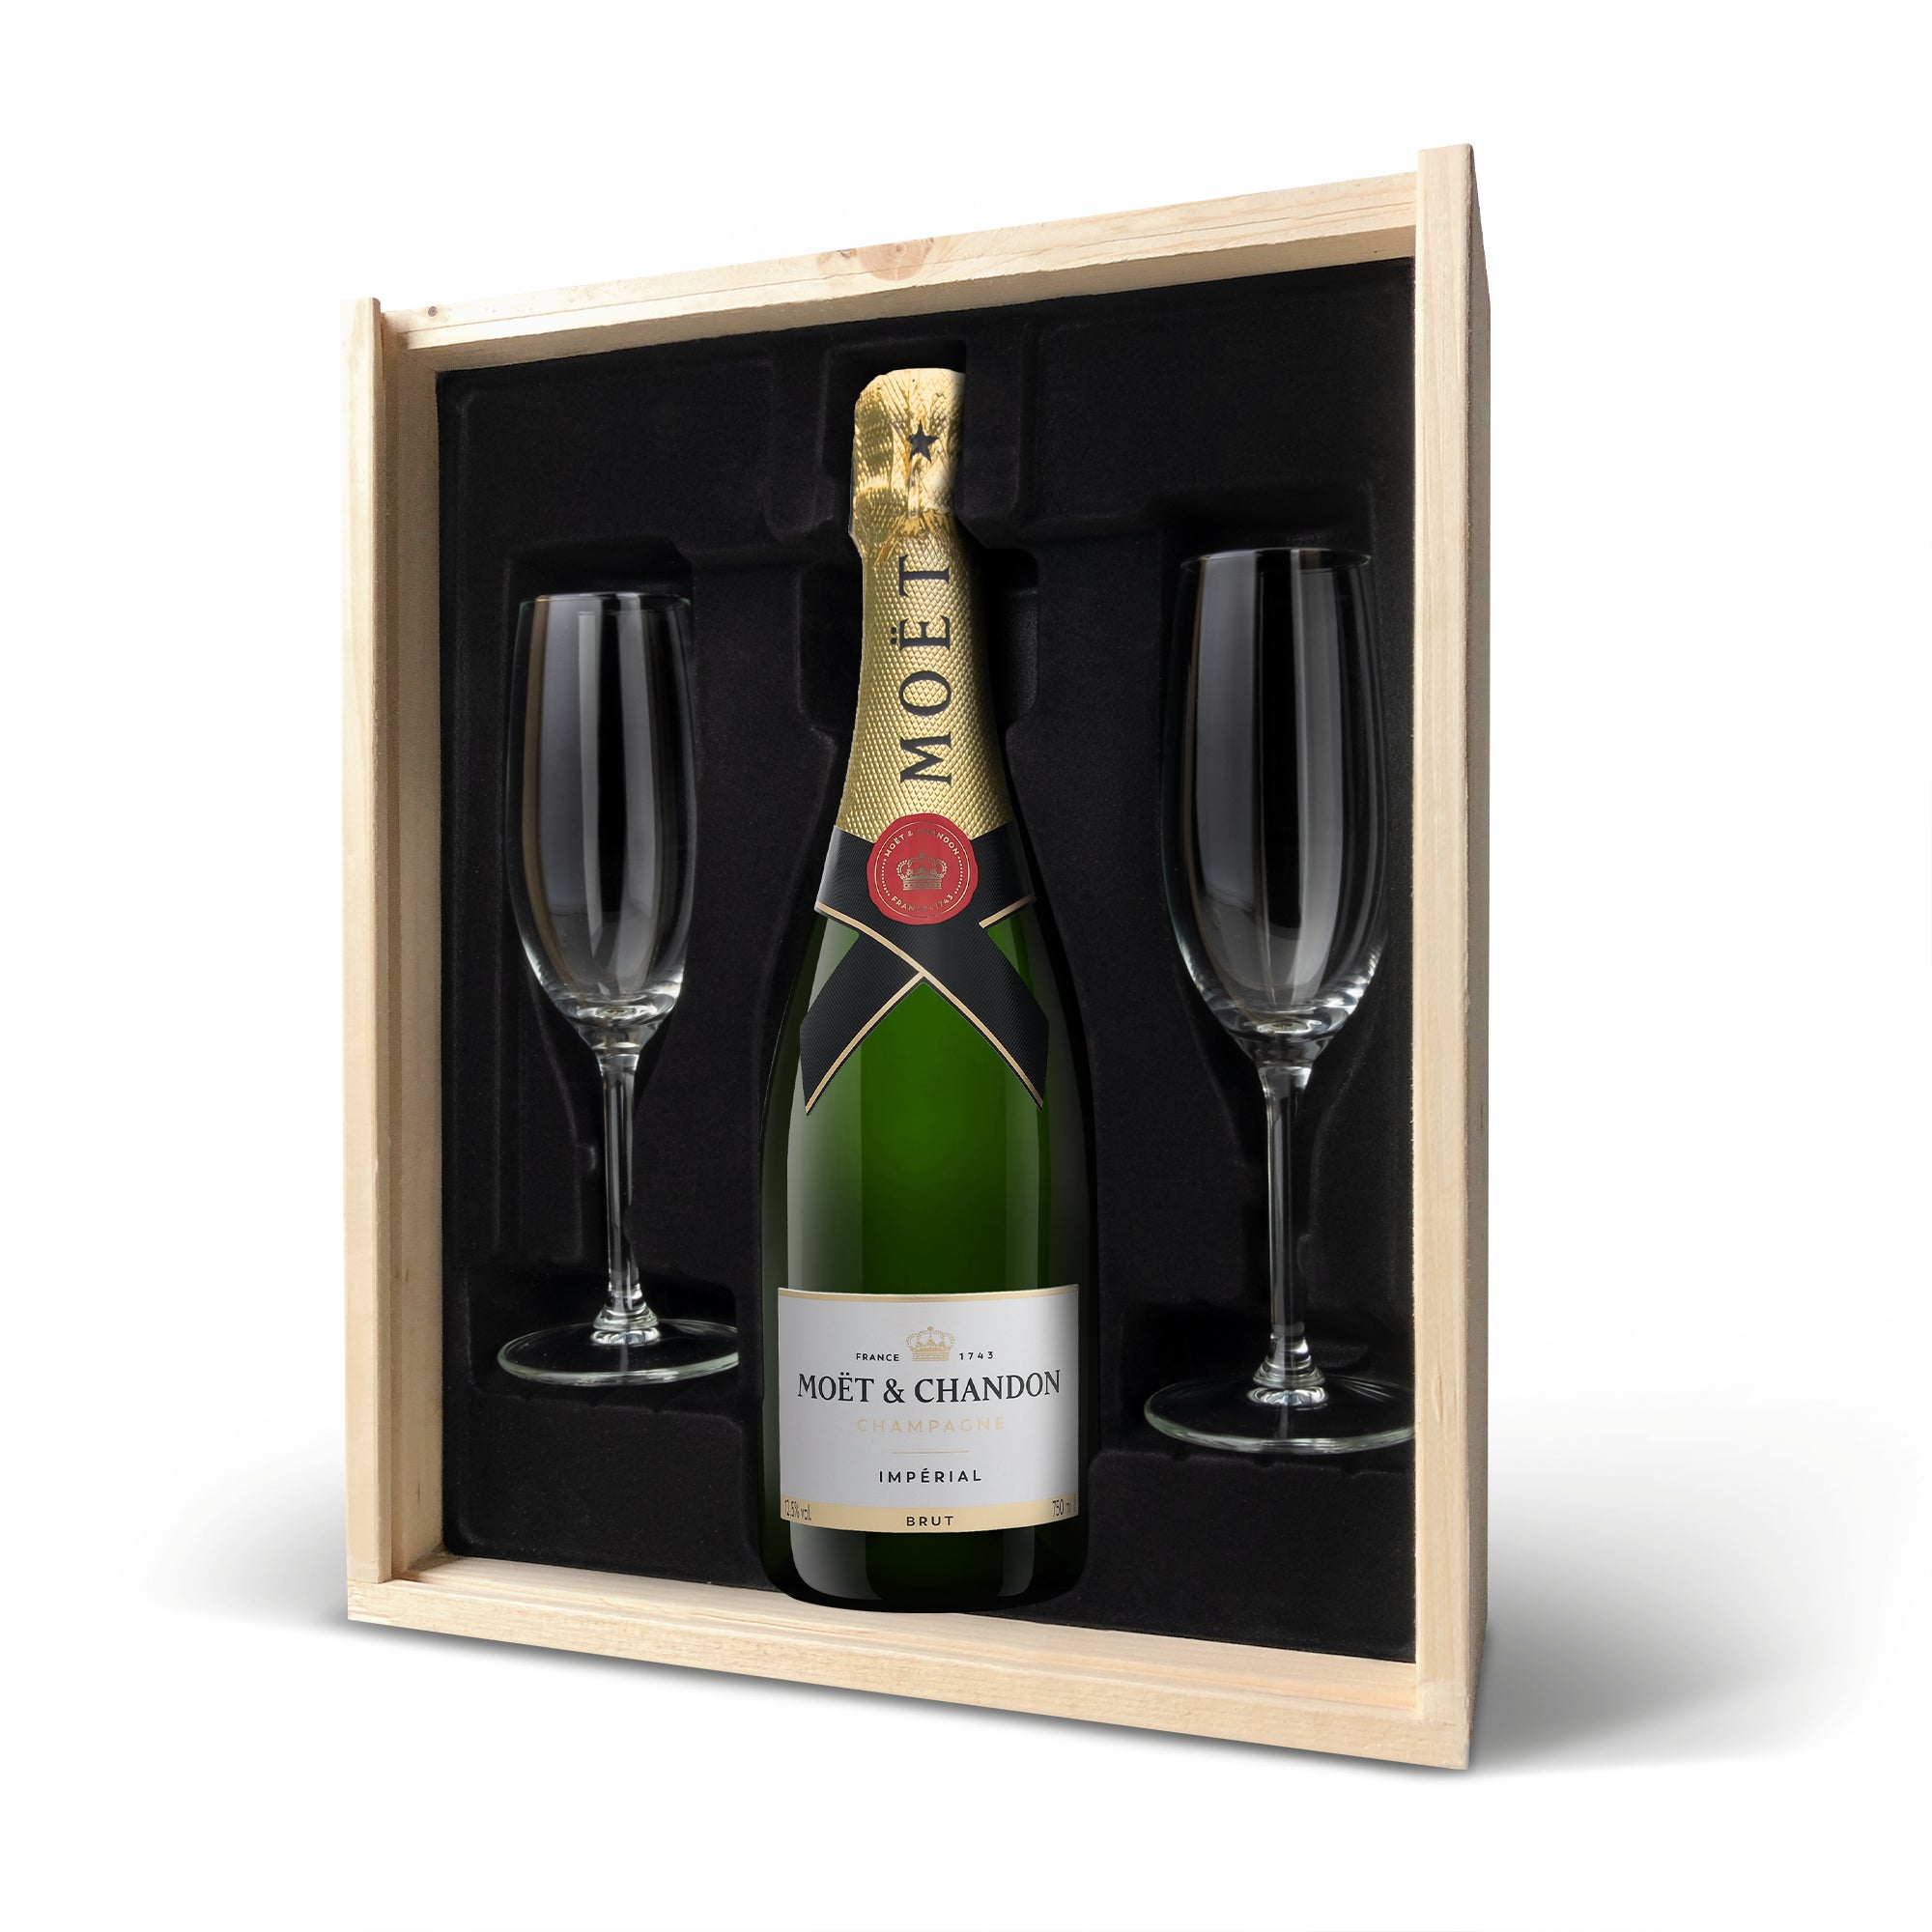 Personalised champagne gift set - Moet et Chandon - Printed wooden case